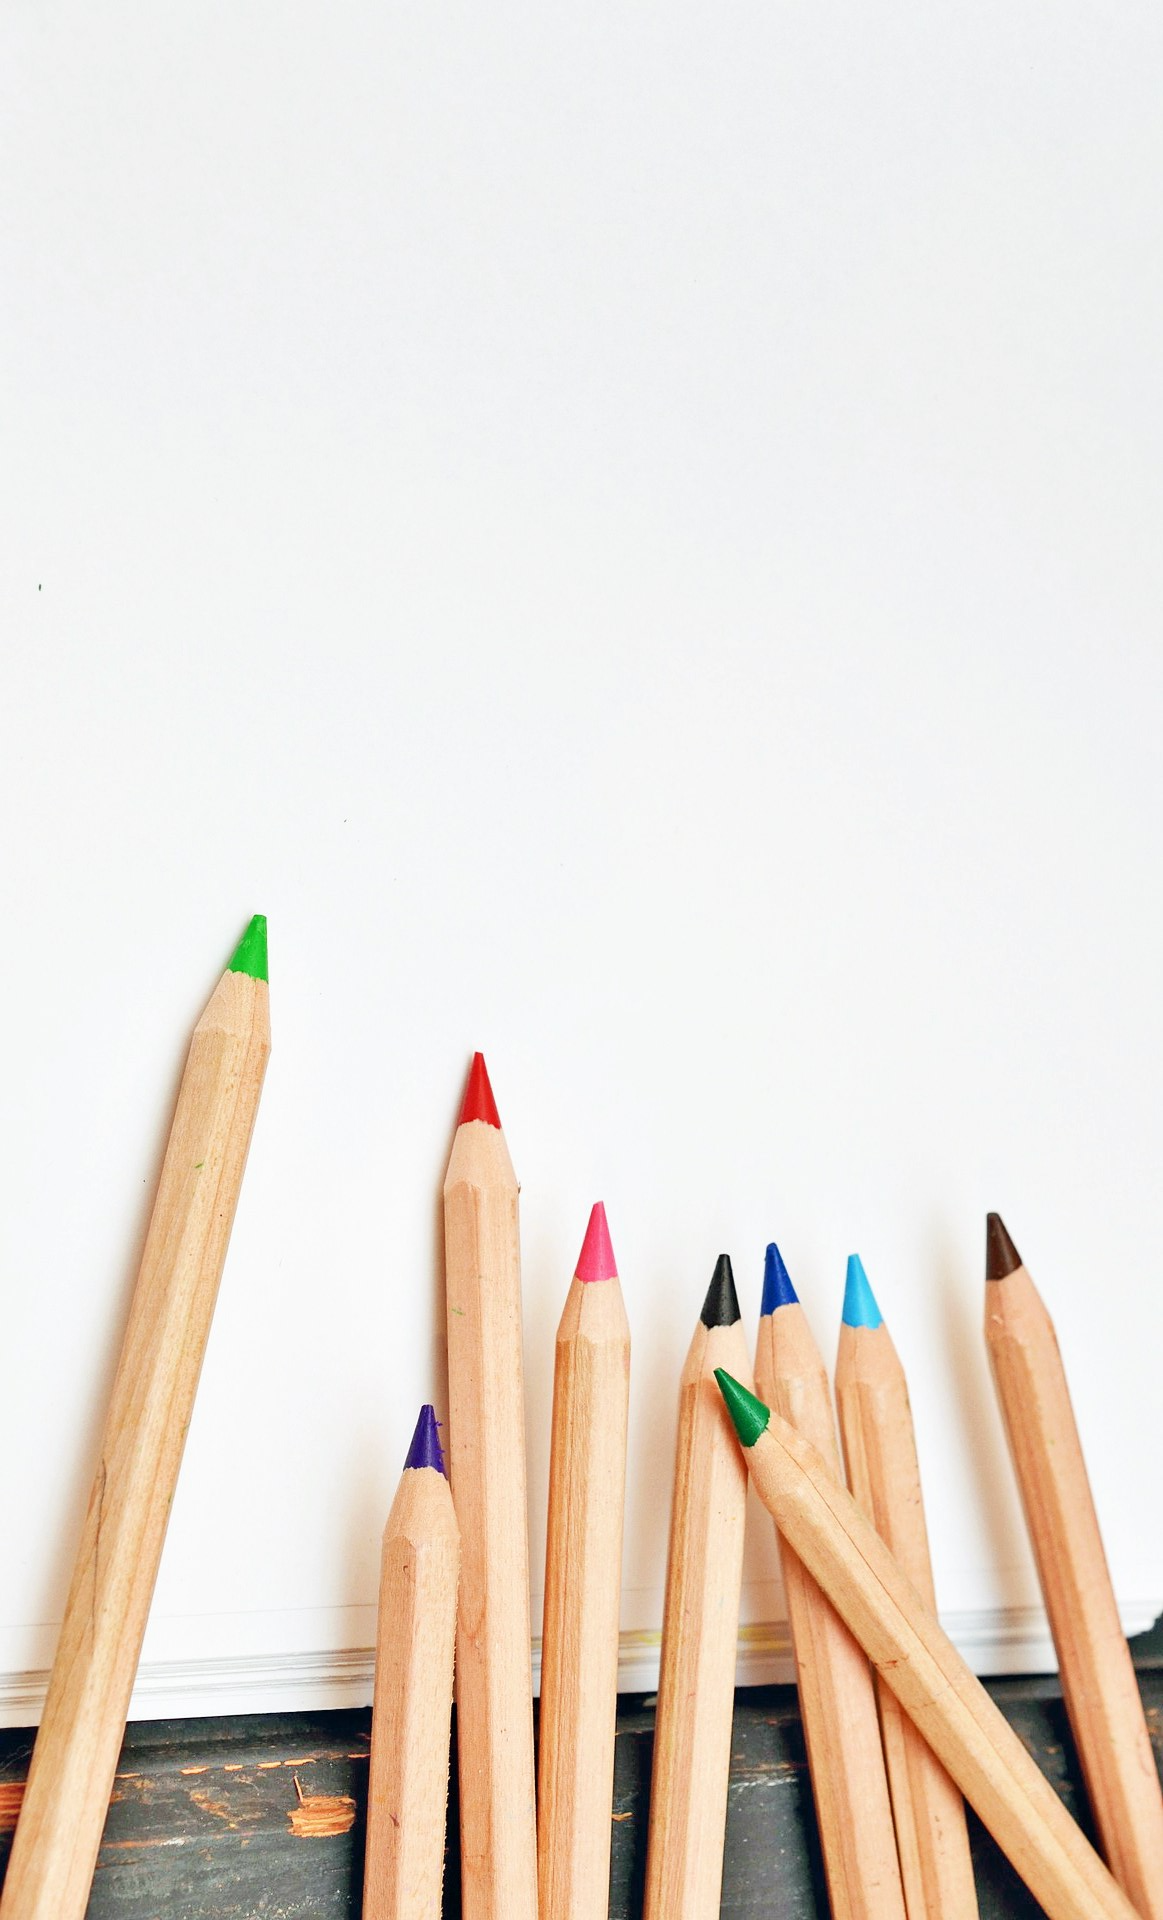 Image of a blank piece of paper with colored pencils.